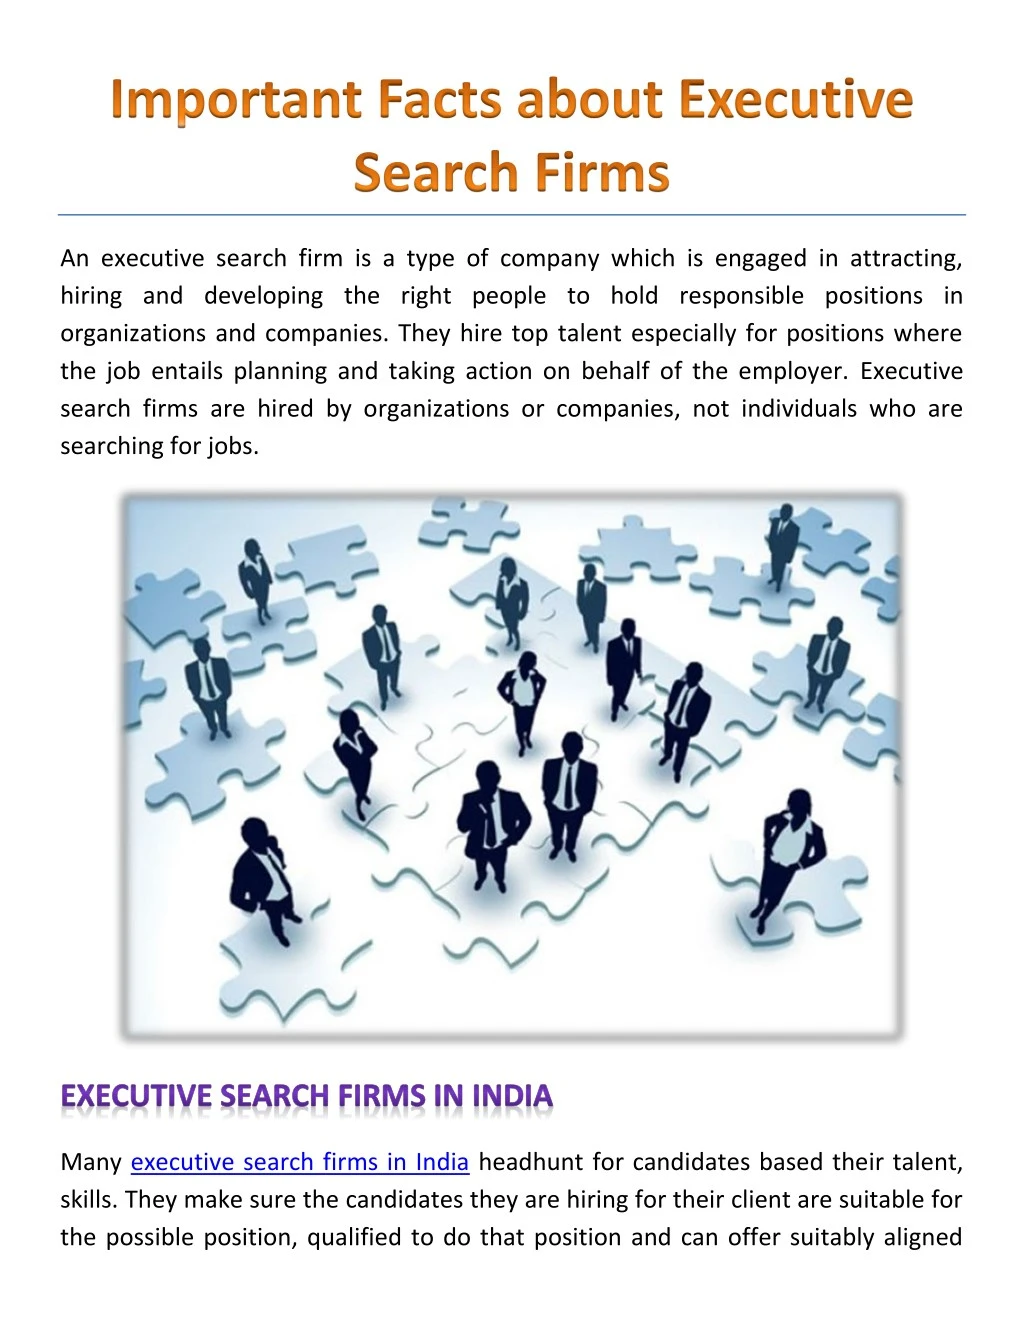 an executive search firm is a type of company